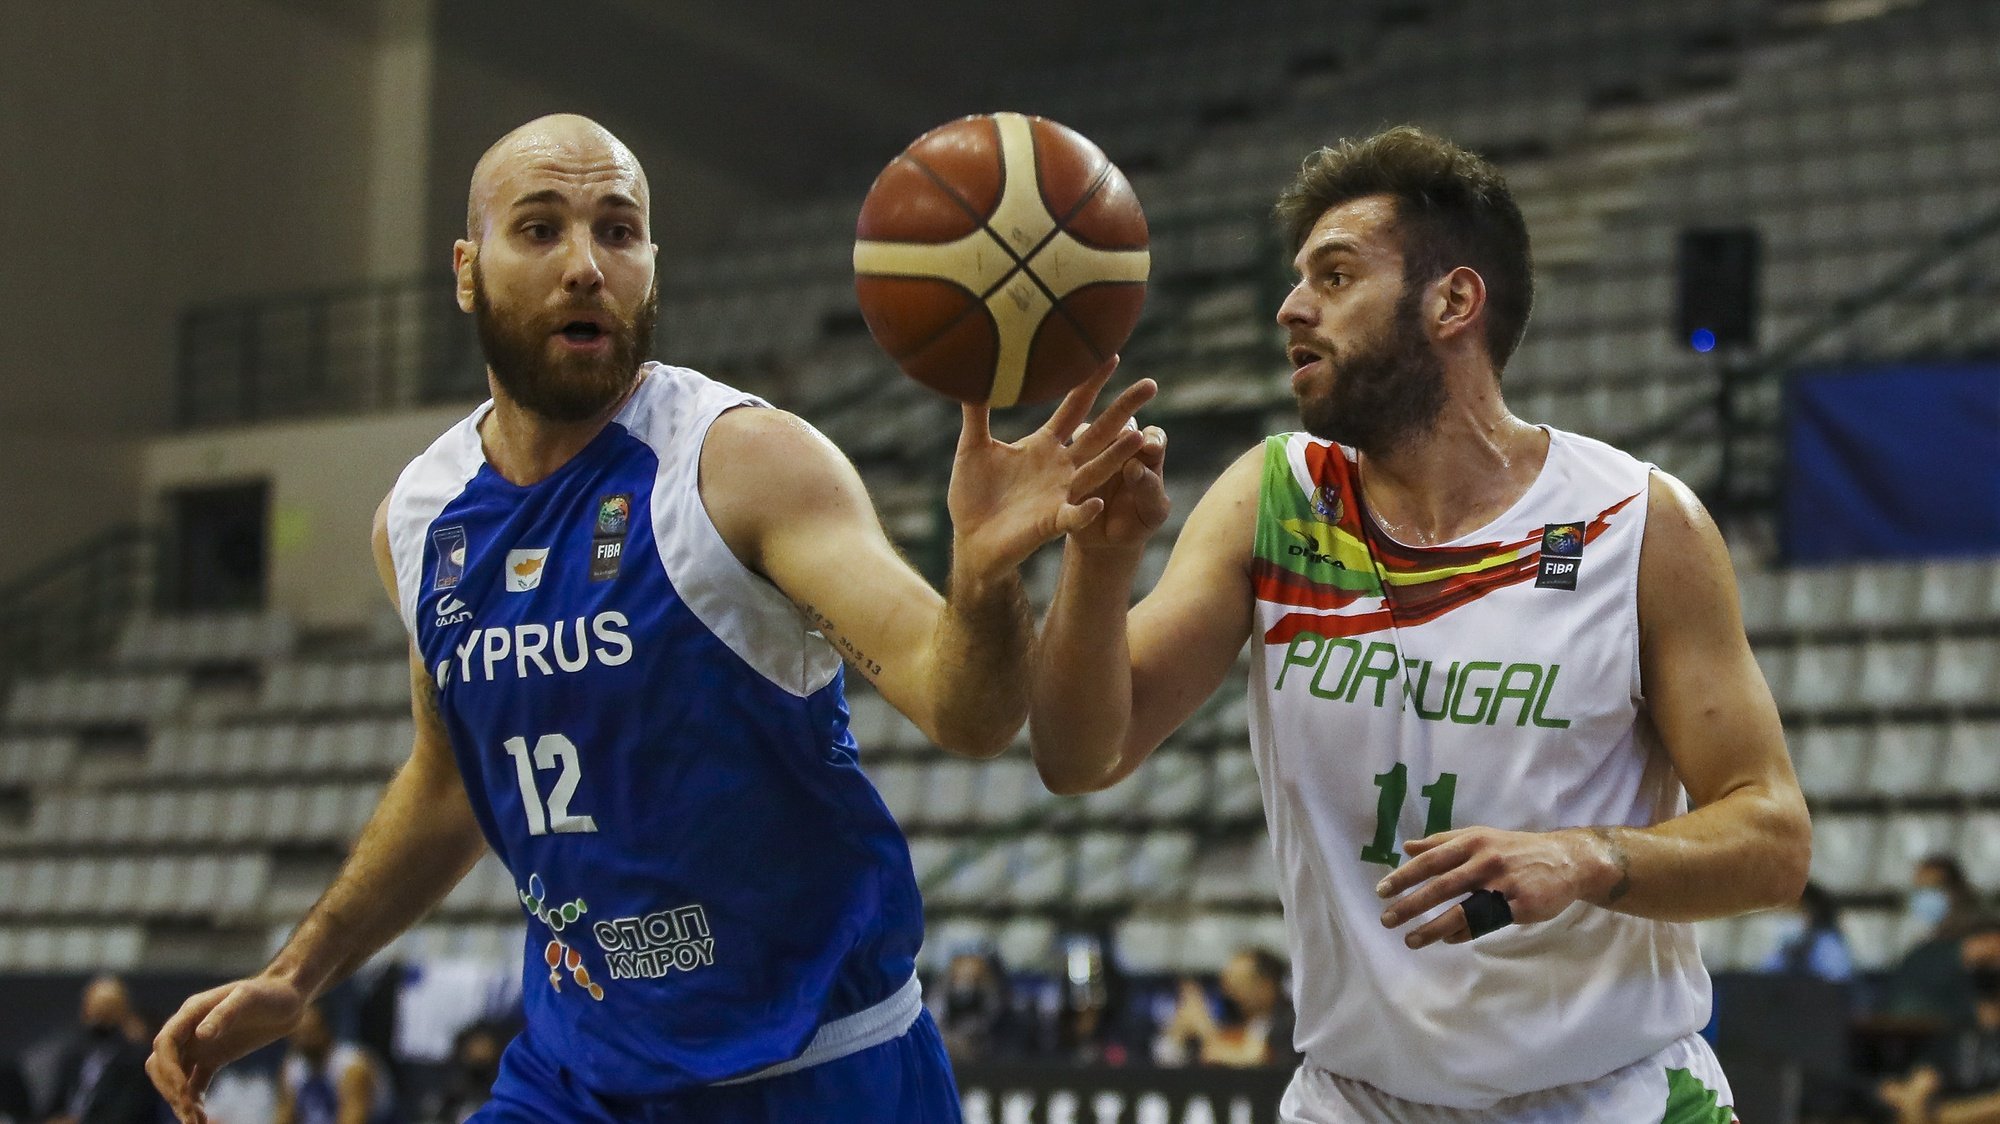 Portugal&#039;s Miguel Queiros (R) in action against Cyprus Roberto Mantovani during their Euro 2023 pre-qualification basketball match, held in Matosinhos, north of Portugal, 26th November 2020. JOSE COELHO/LUSA